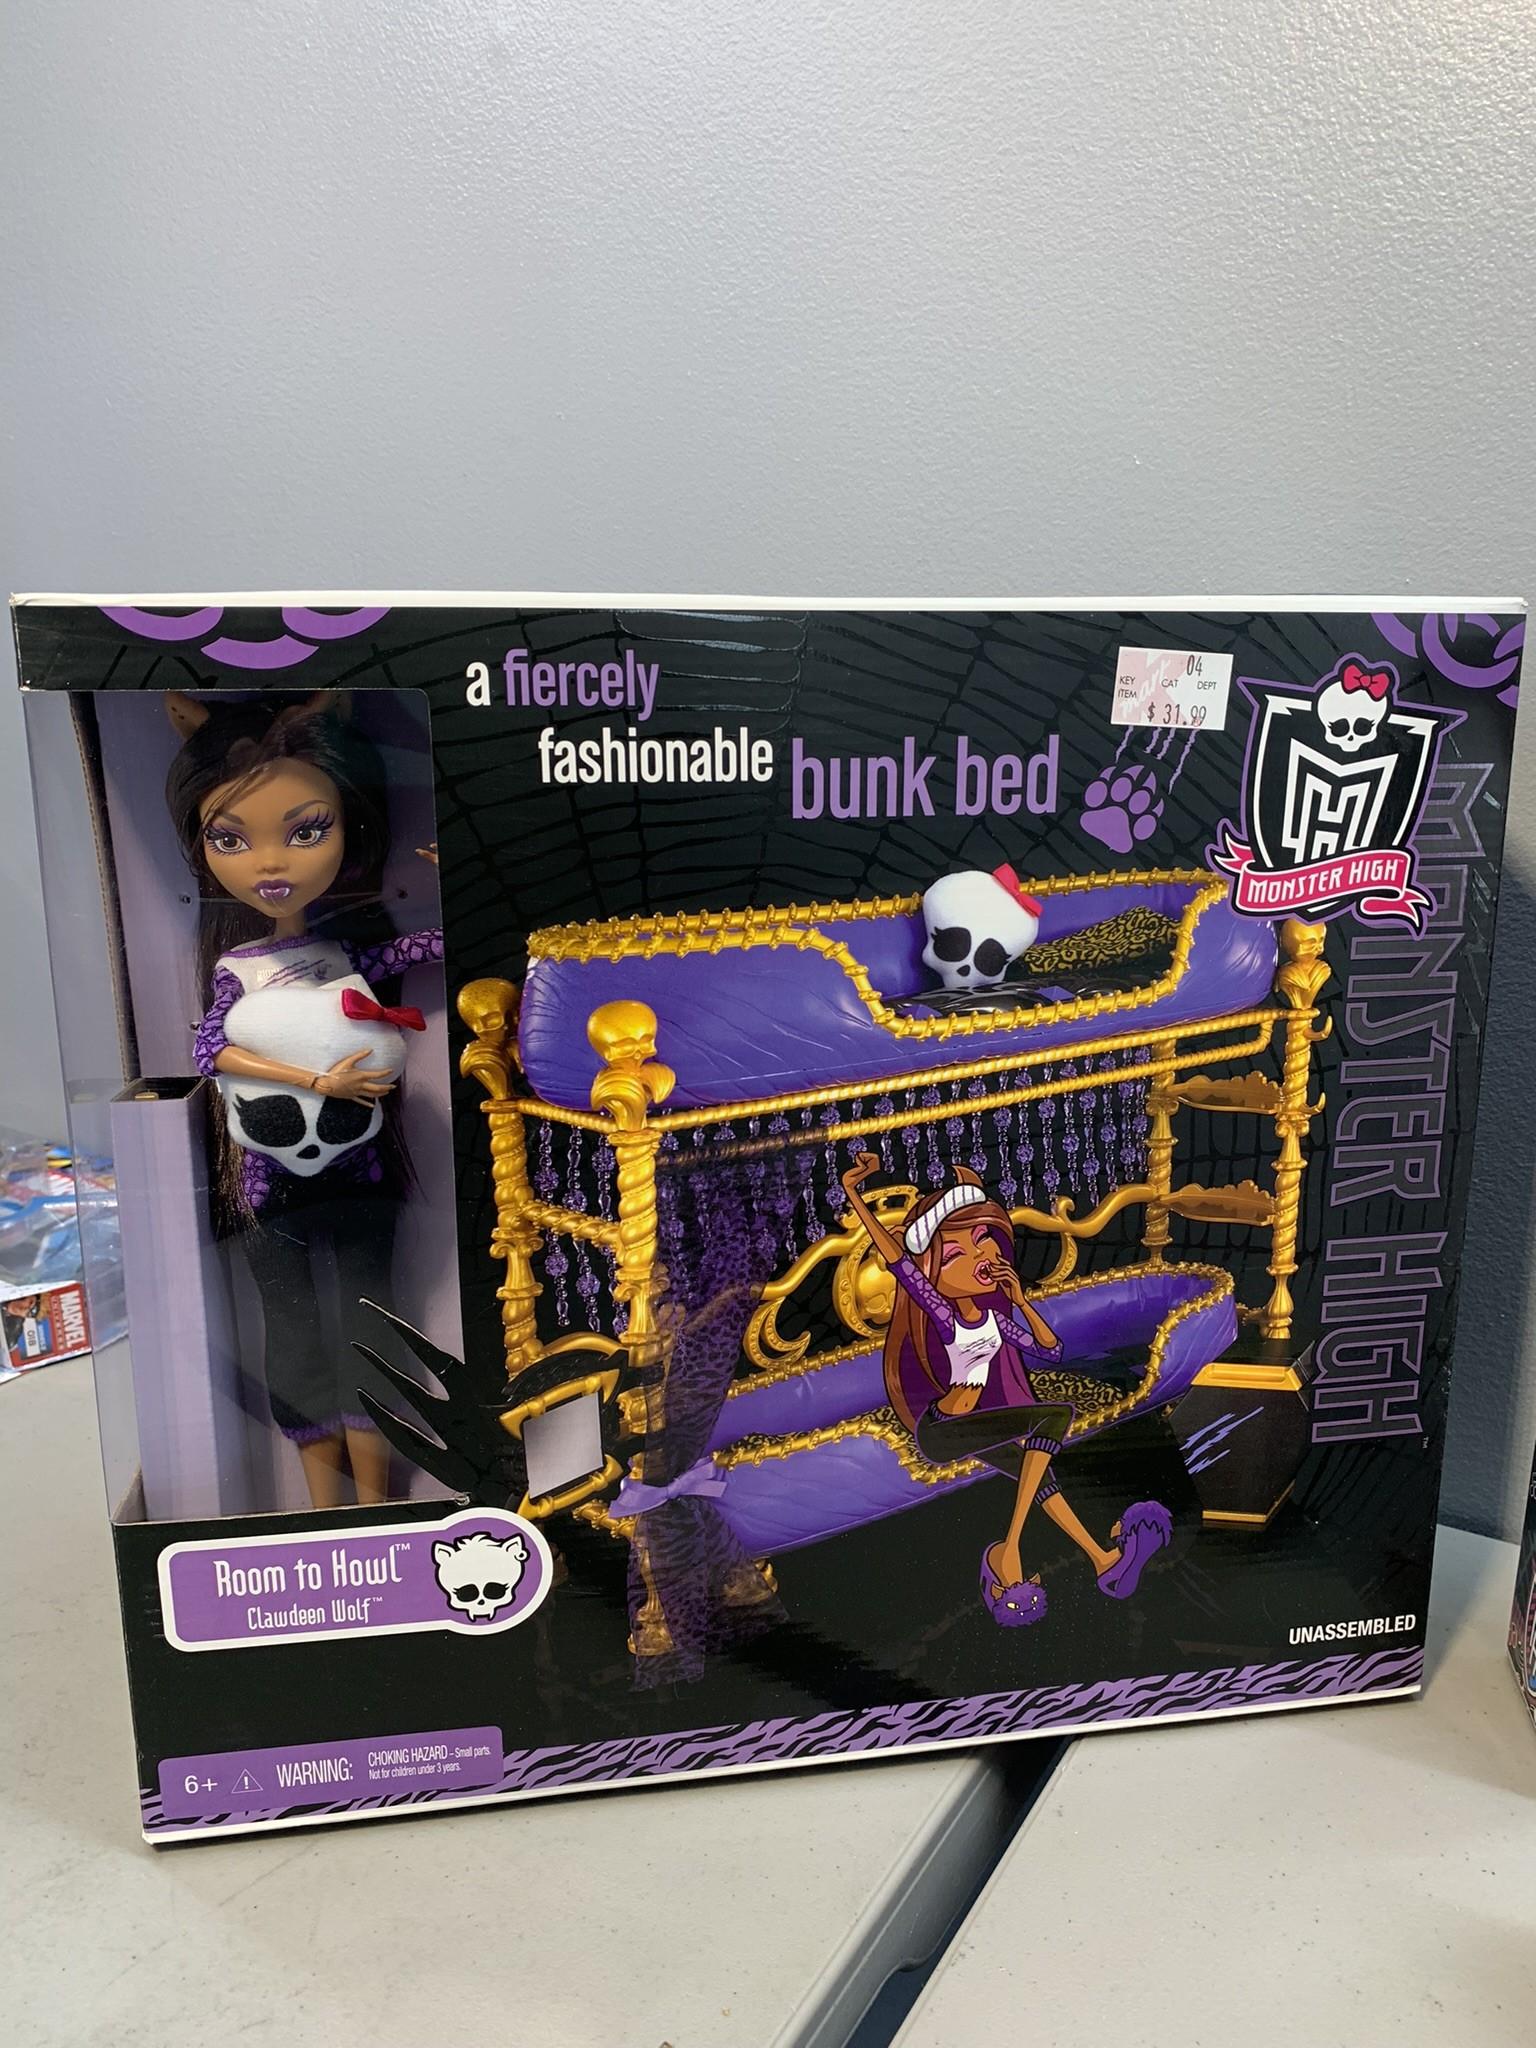 Monster High Dolls & Accessories -  Room to Howl Clawdeen Wolf Bunk Bed,